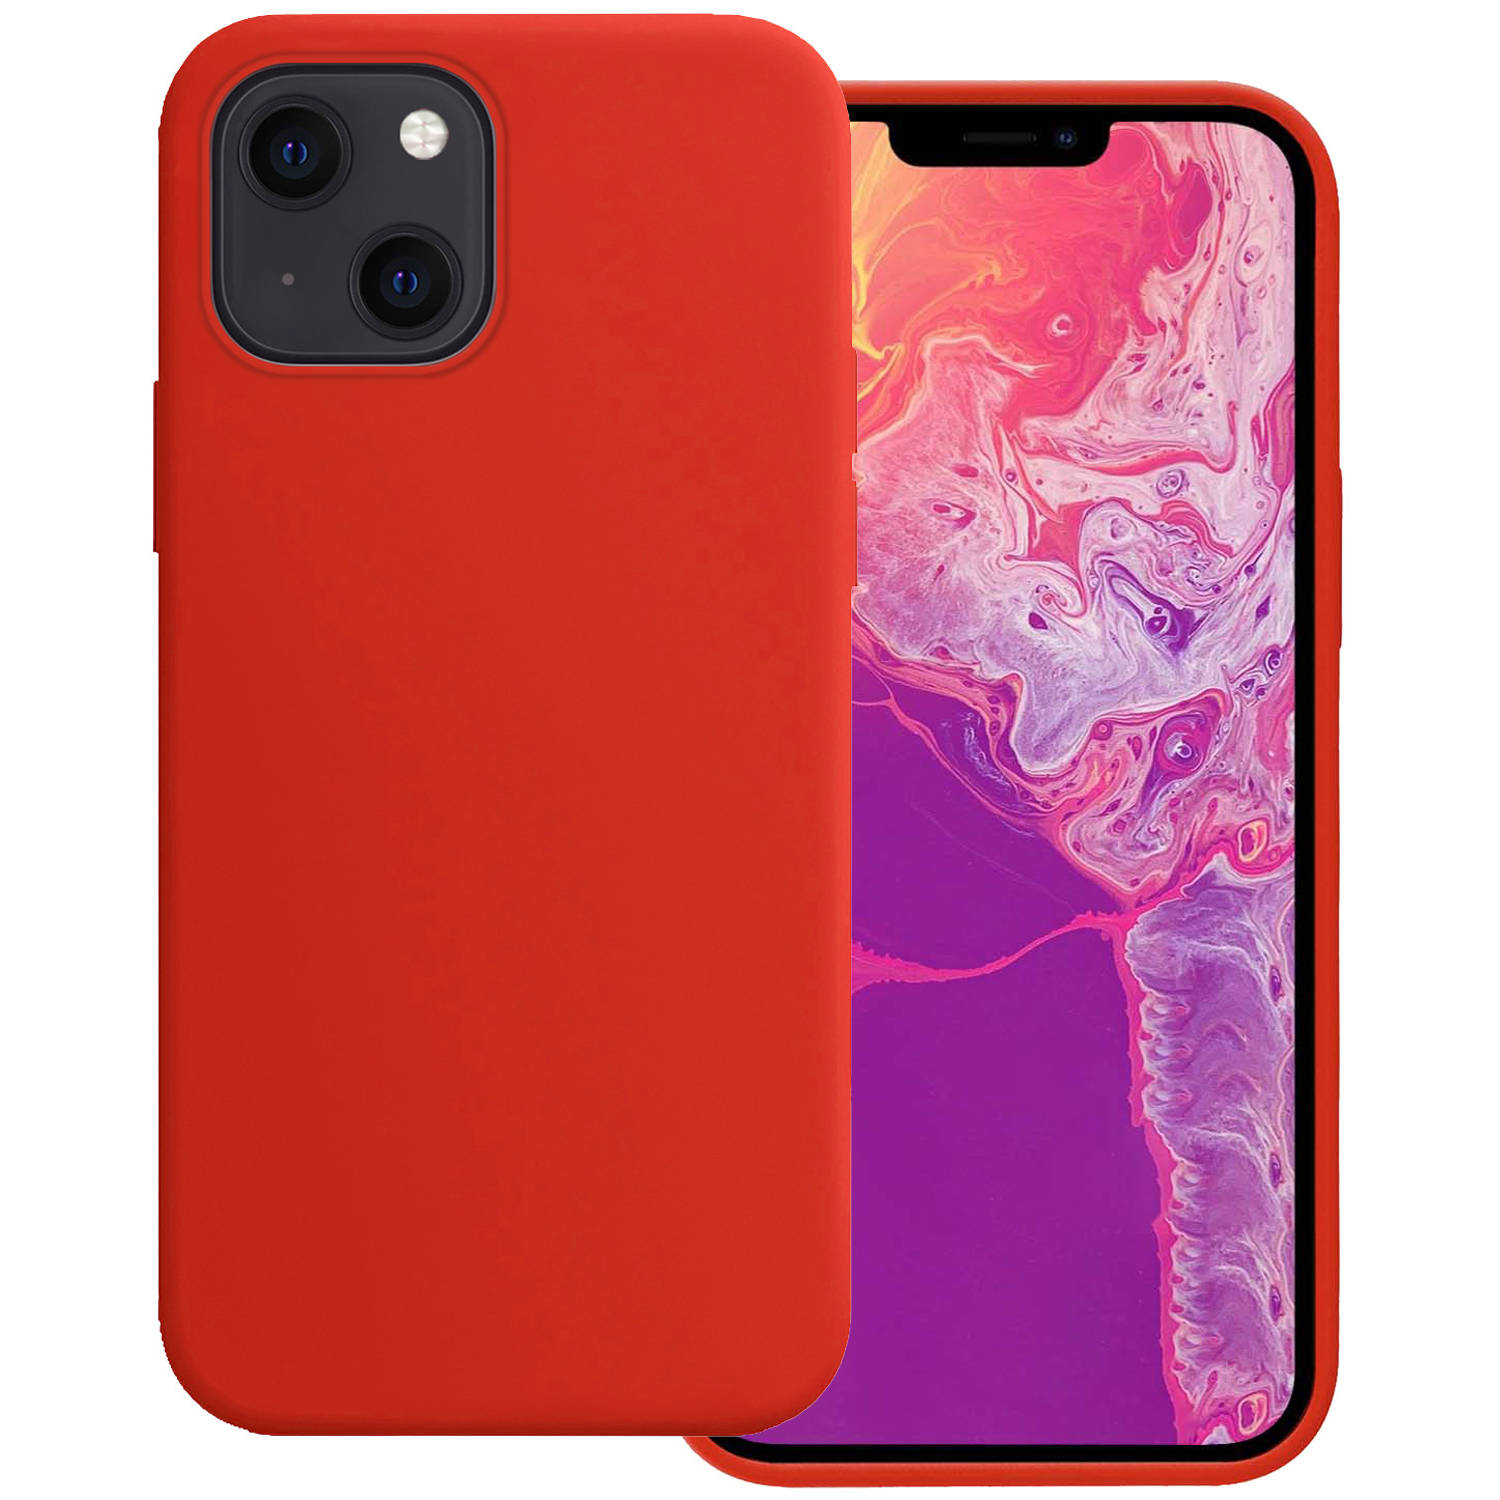 Basey iPhone 13 Hoesje Silicone Case - iPhone 13 Case Rood Siliconen Hoes - iPhone 13 Hoes Cover - Rood